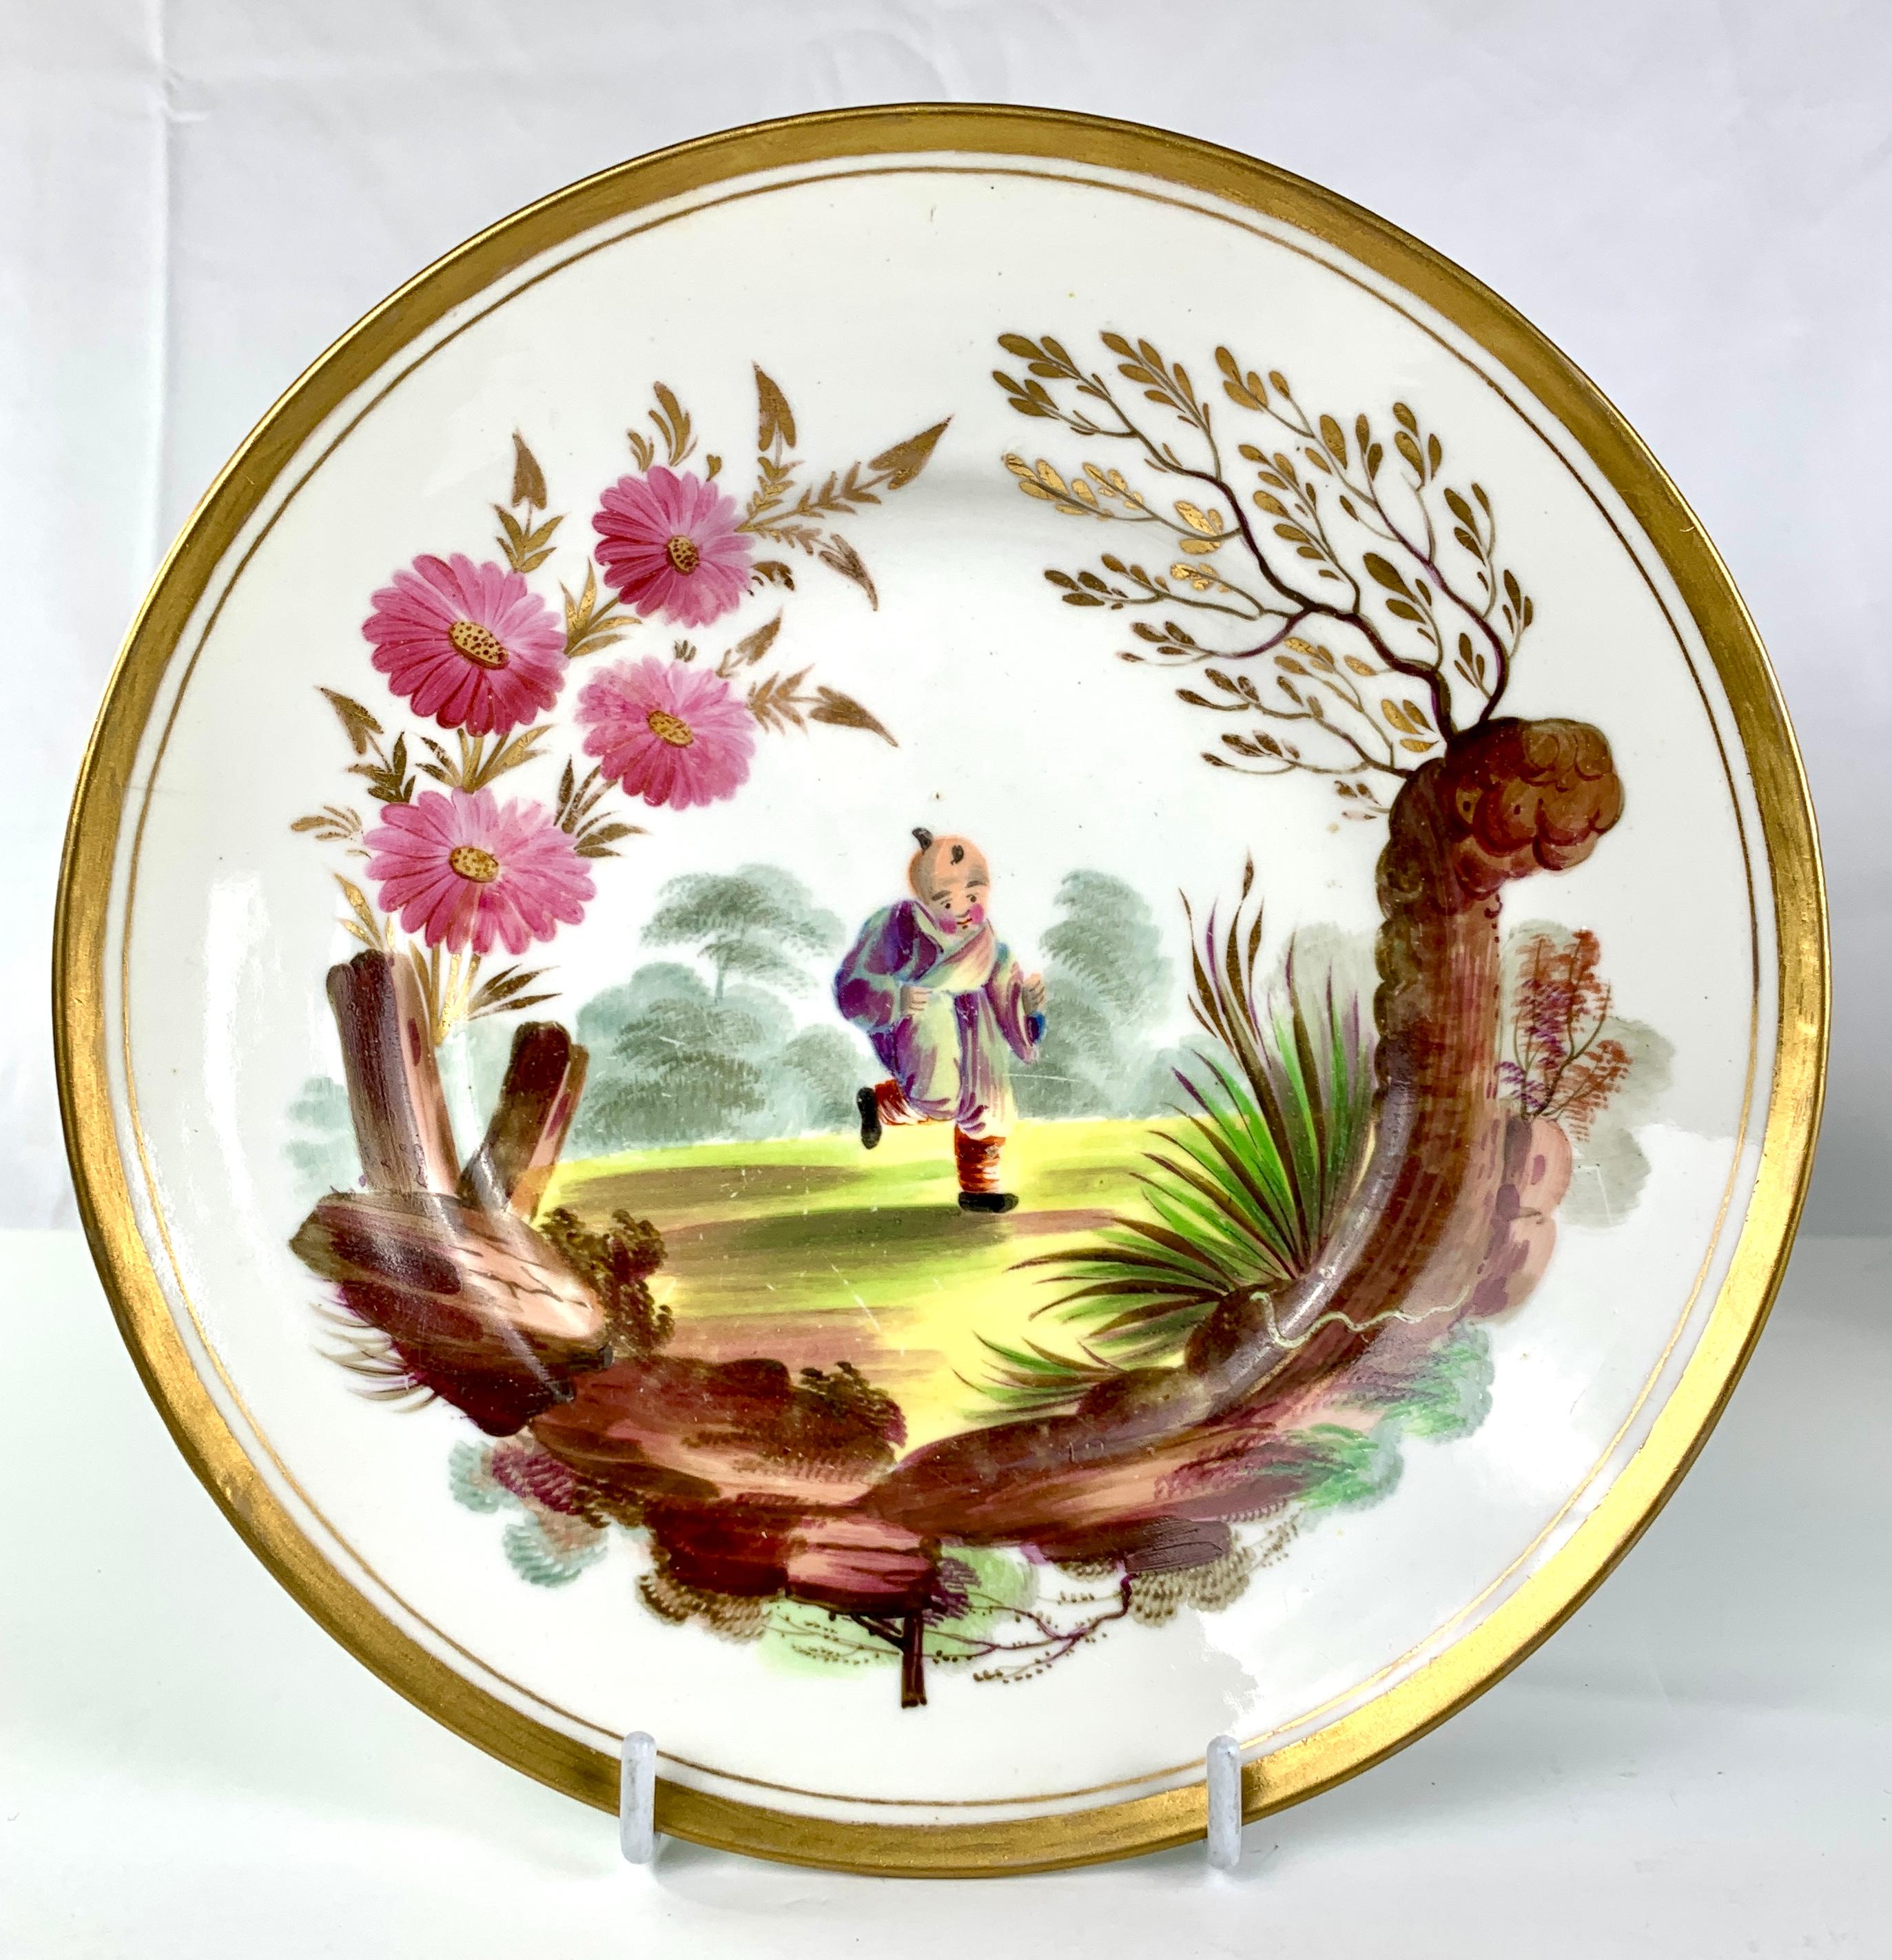 2 Antique Porcelain Chinoiserie Plates Hand Painted by Minton England Circa 1805 1